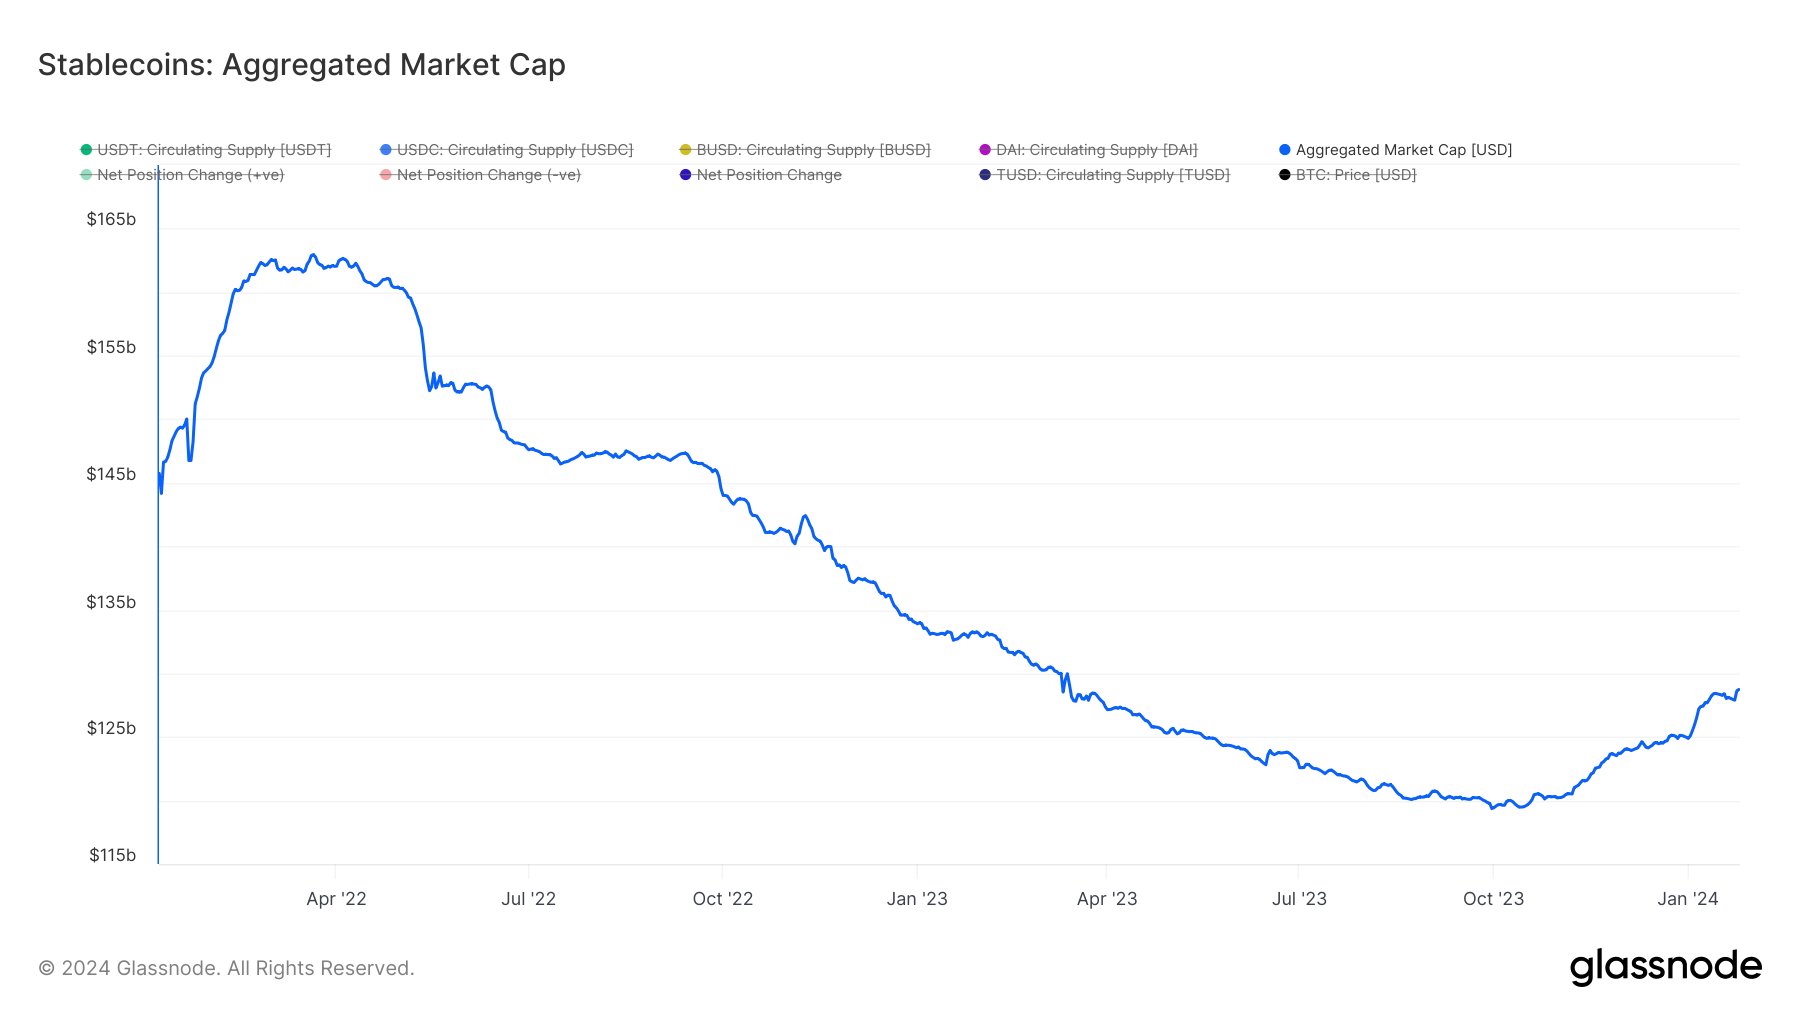 Total stablecoin market capitalization